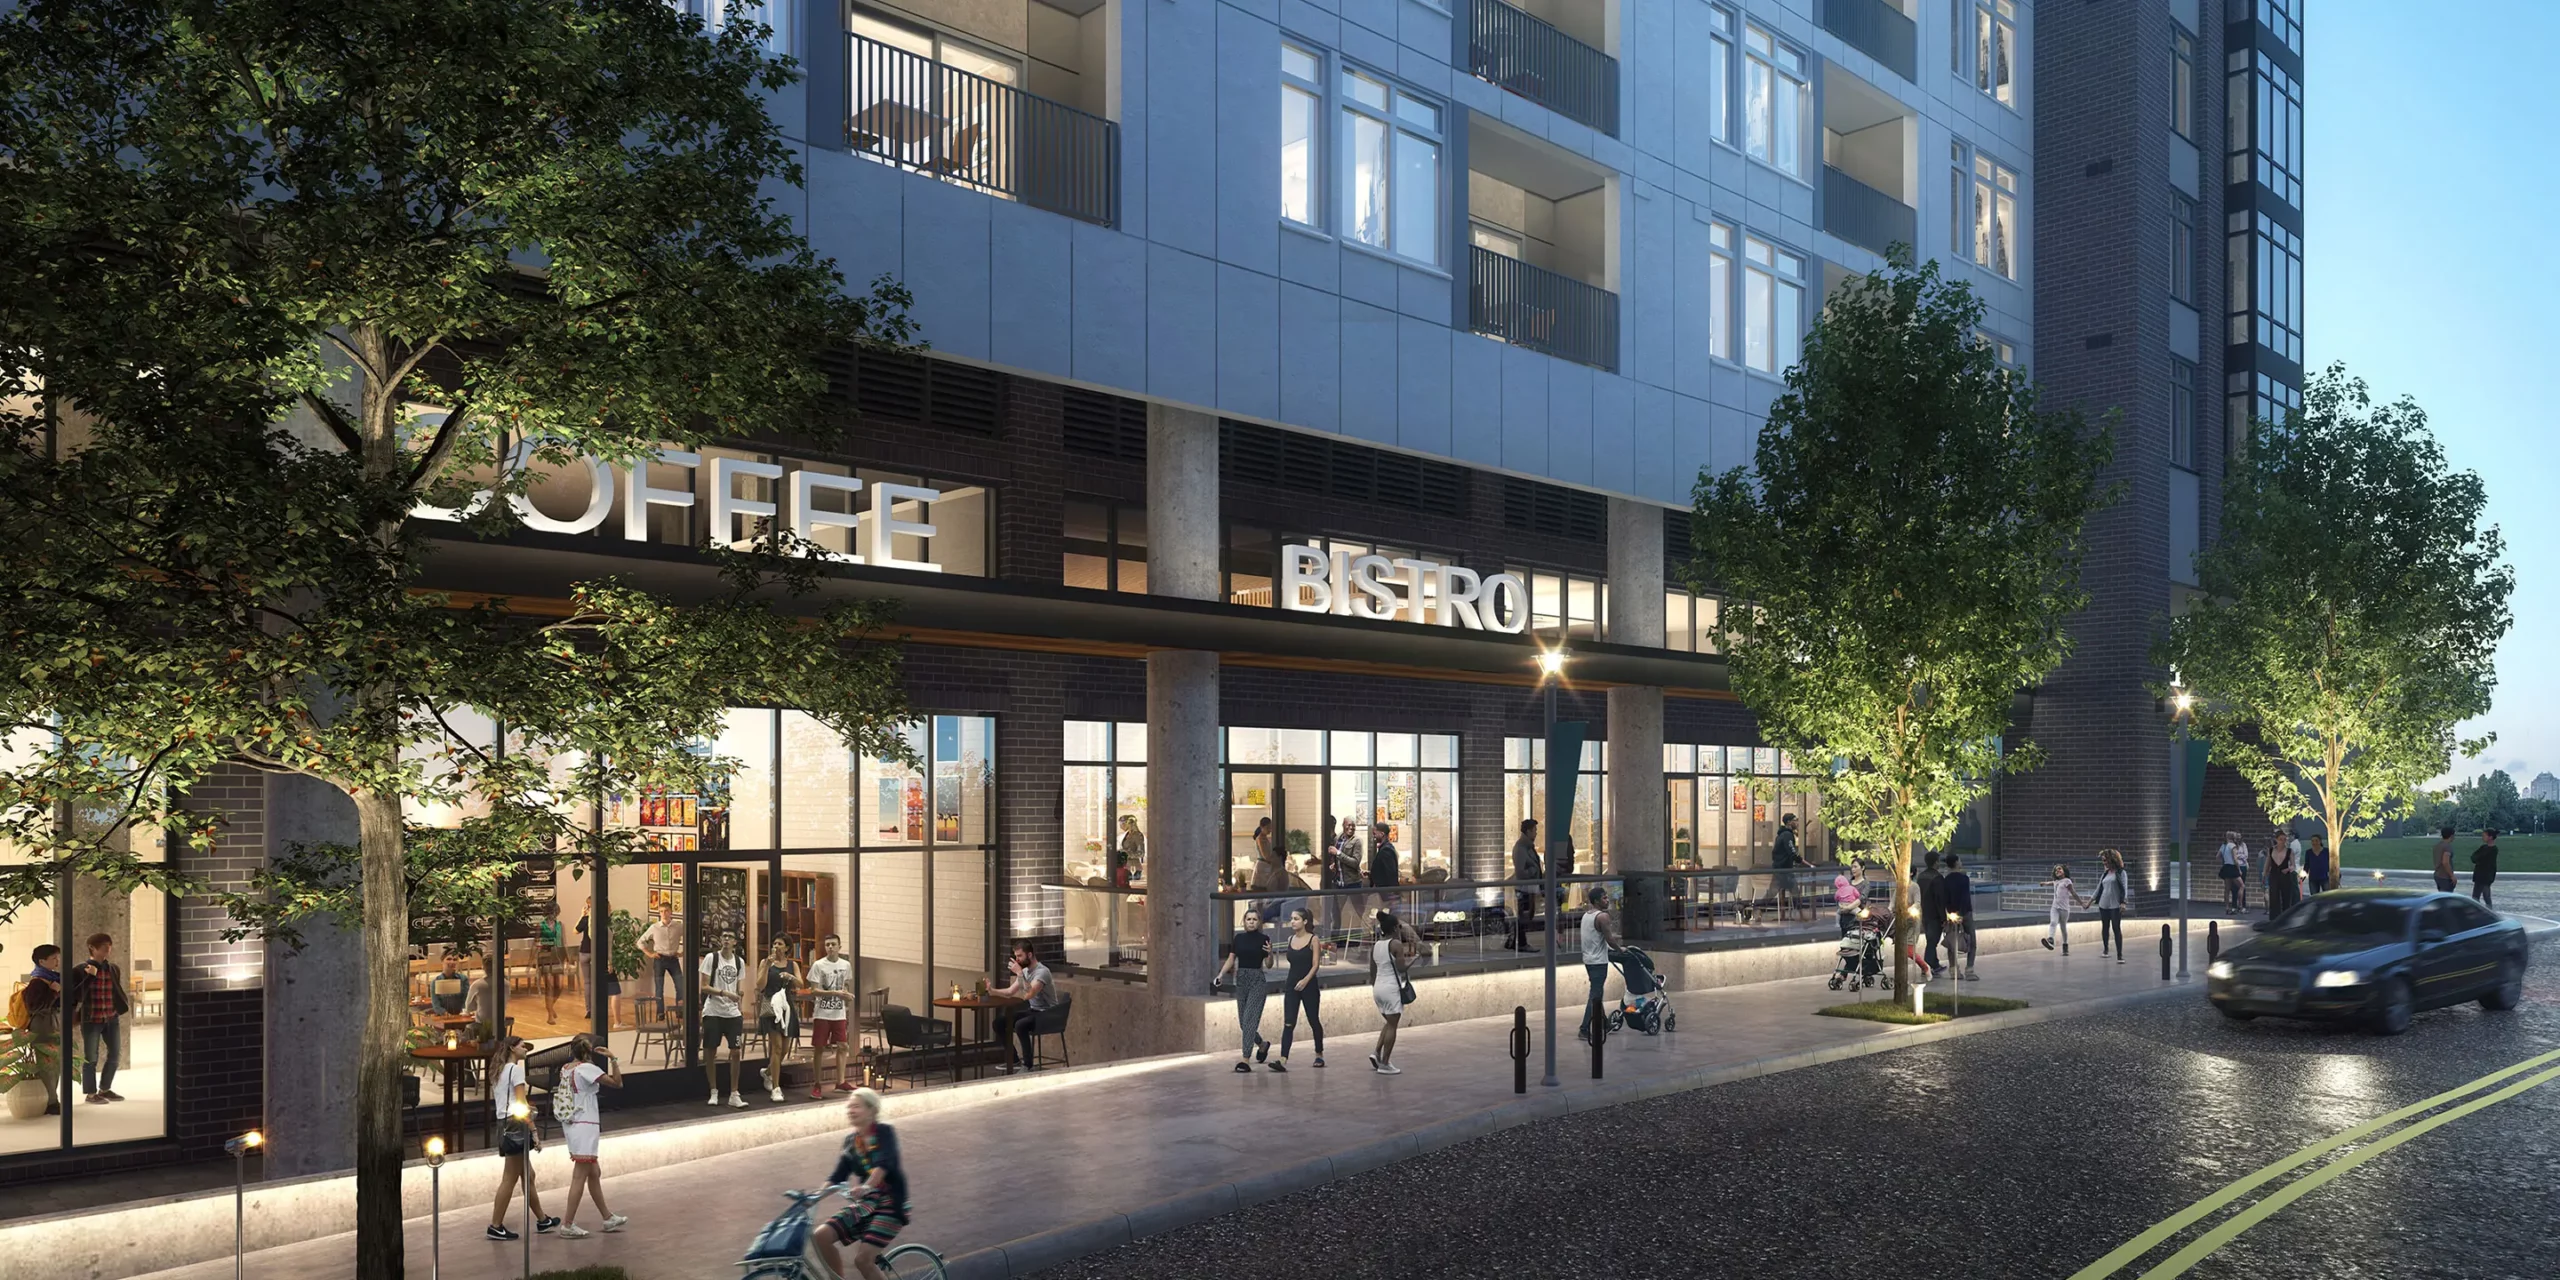 modera-gulch-cooper-carry-multifamily-residential-rendering-exterior-lobby-retail